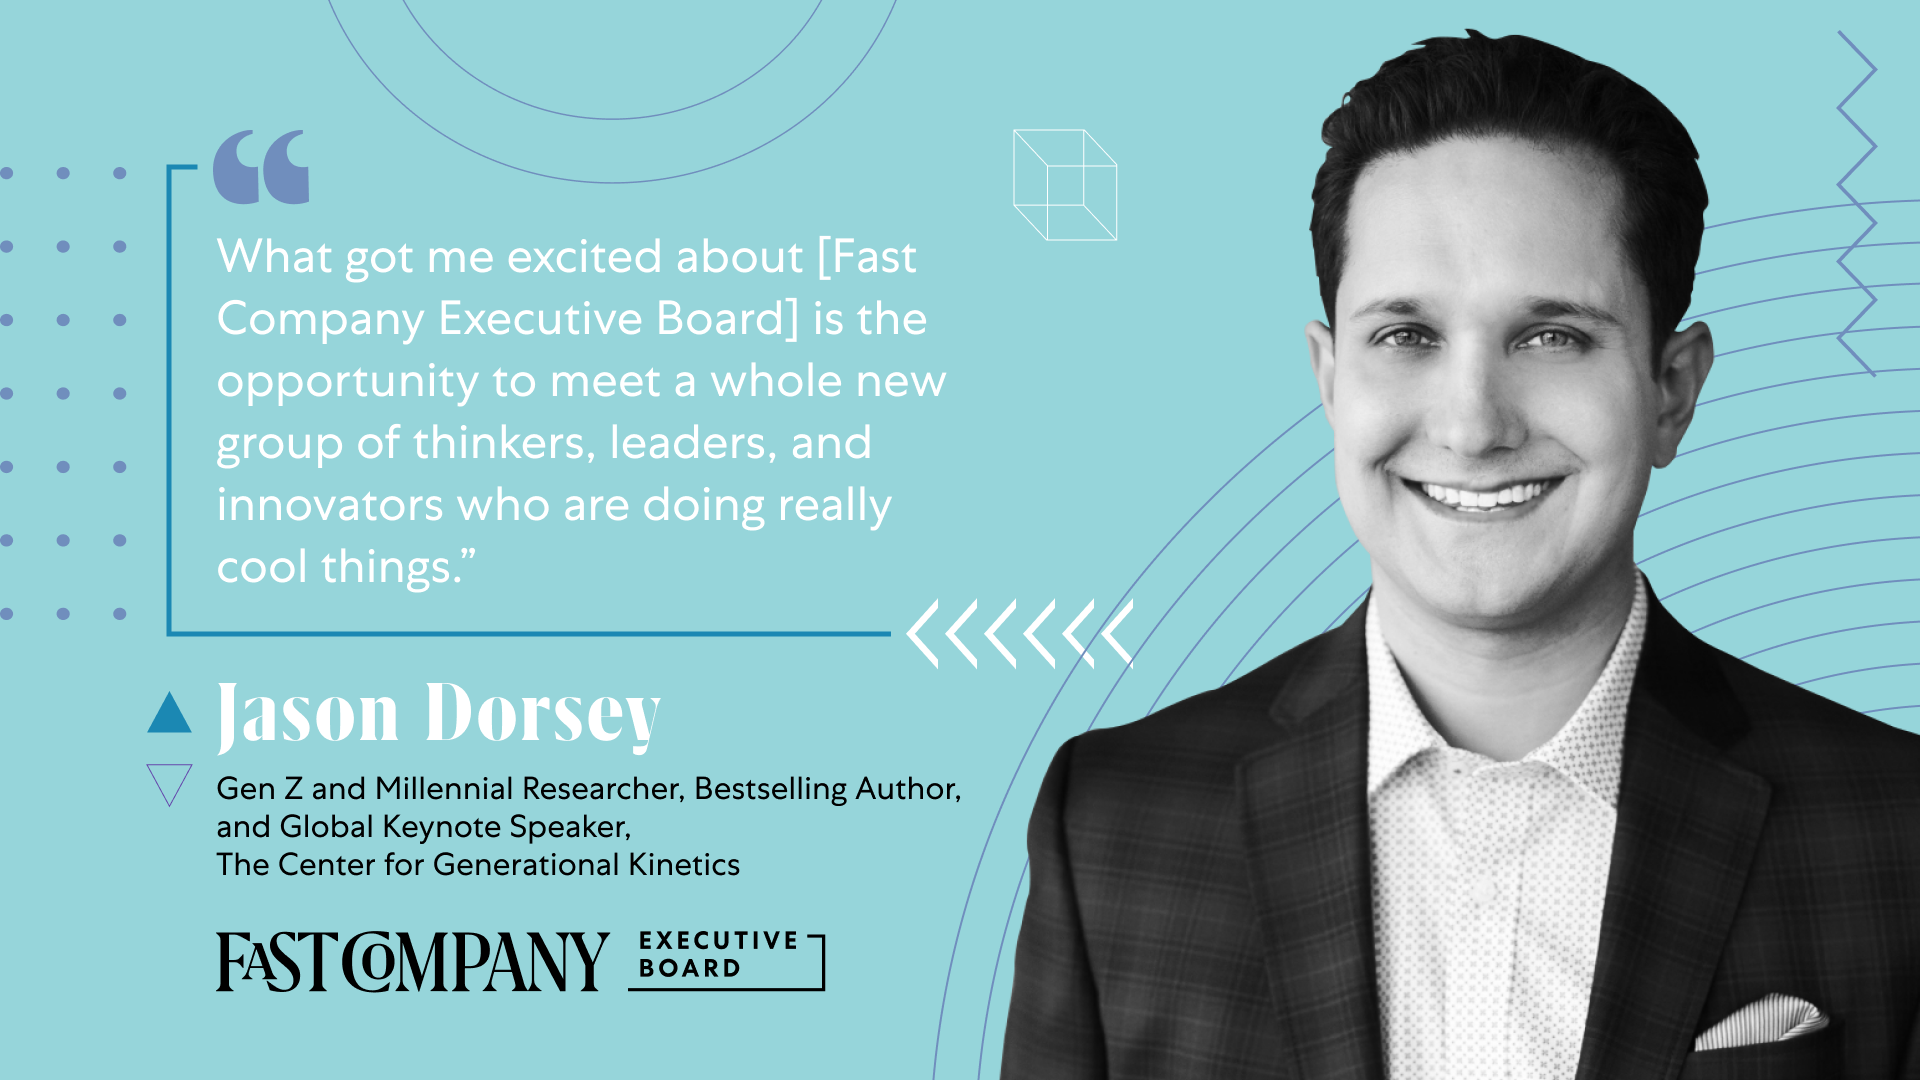 Fast Company Executive Board Will Give Jason Dorsey New Connections To Innovators and Leaders